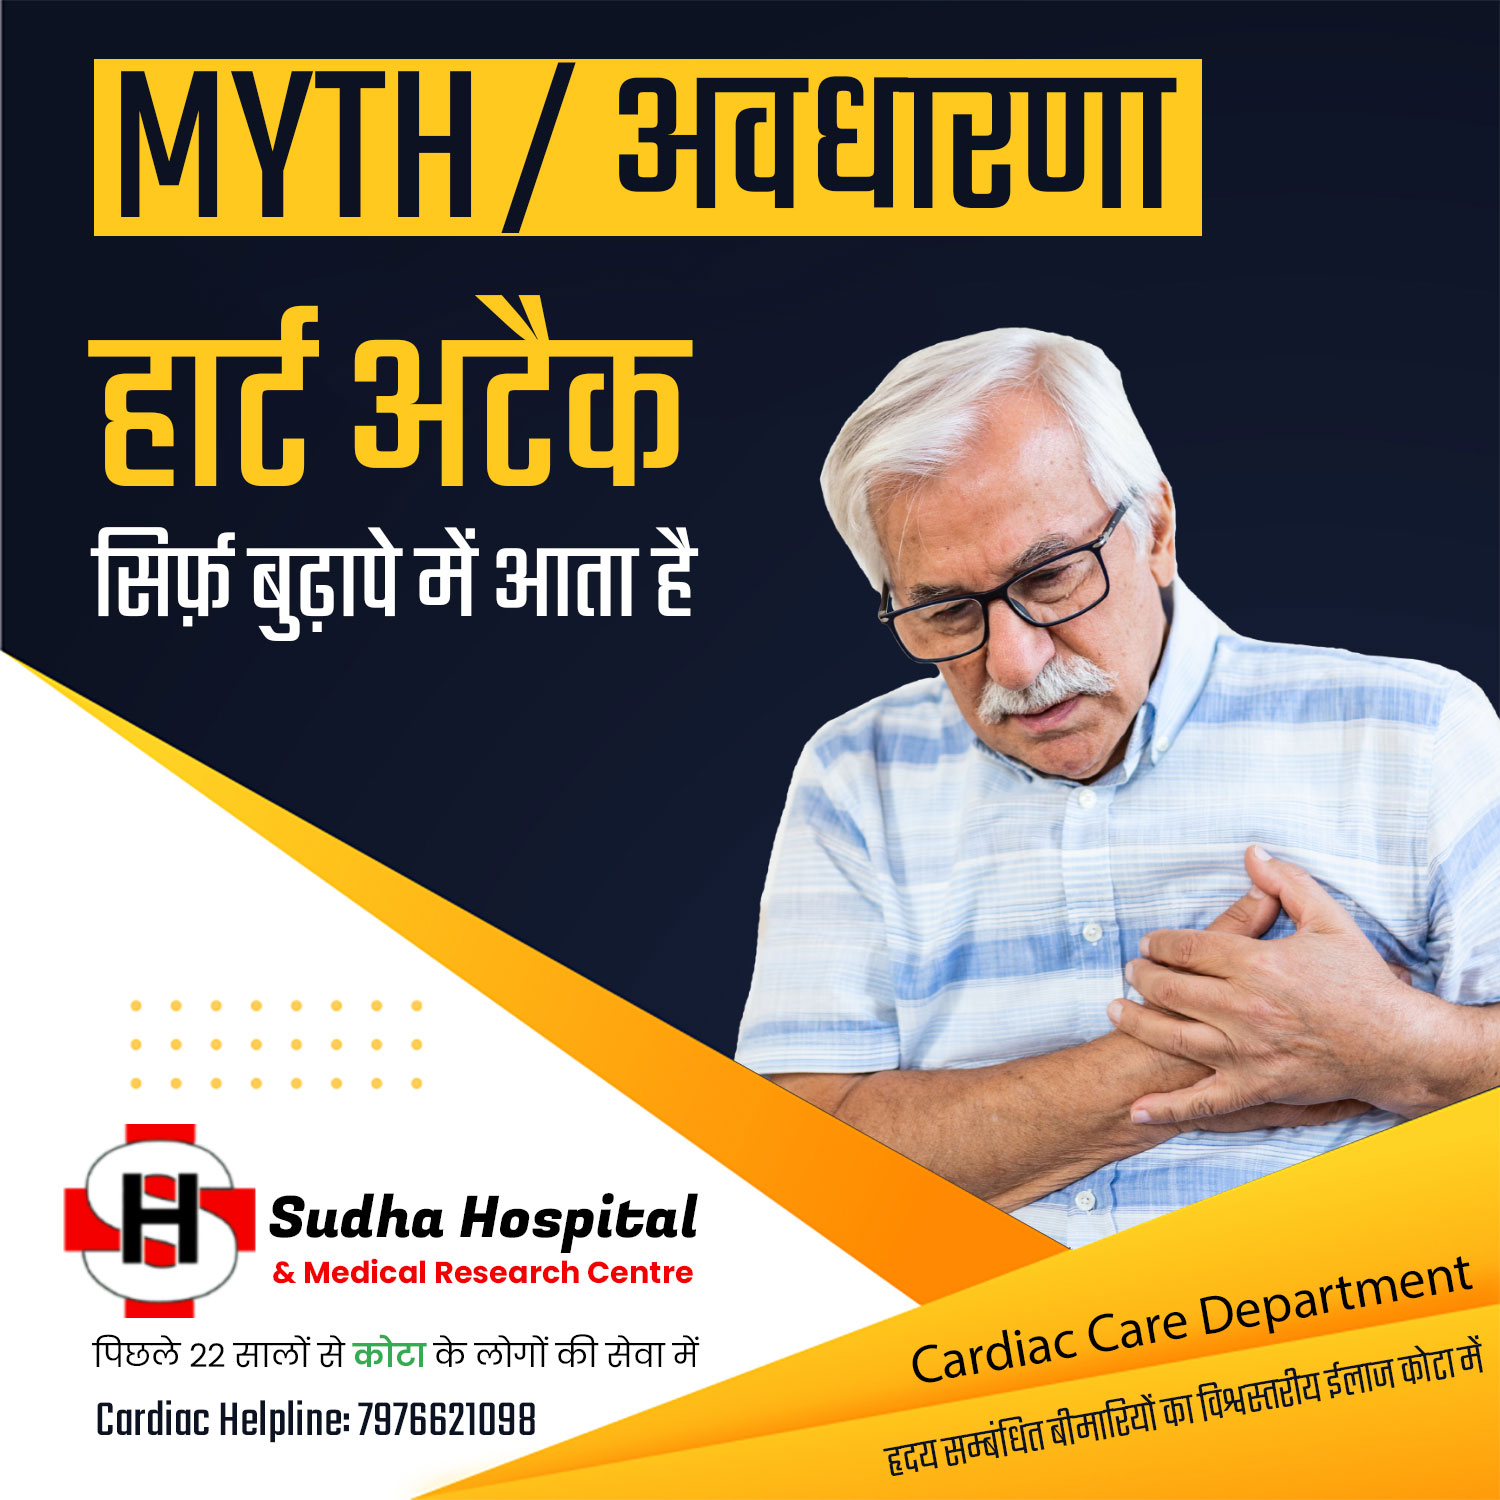 Heart attack in young adults explained in Hindi | Sudha Hospital - Kota